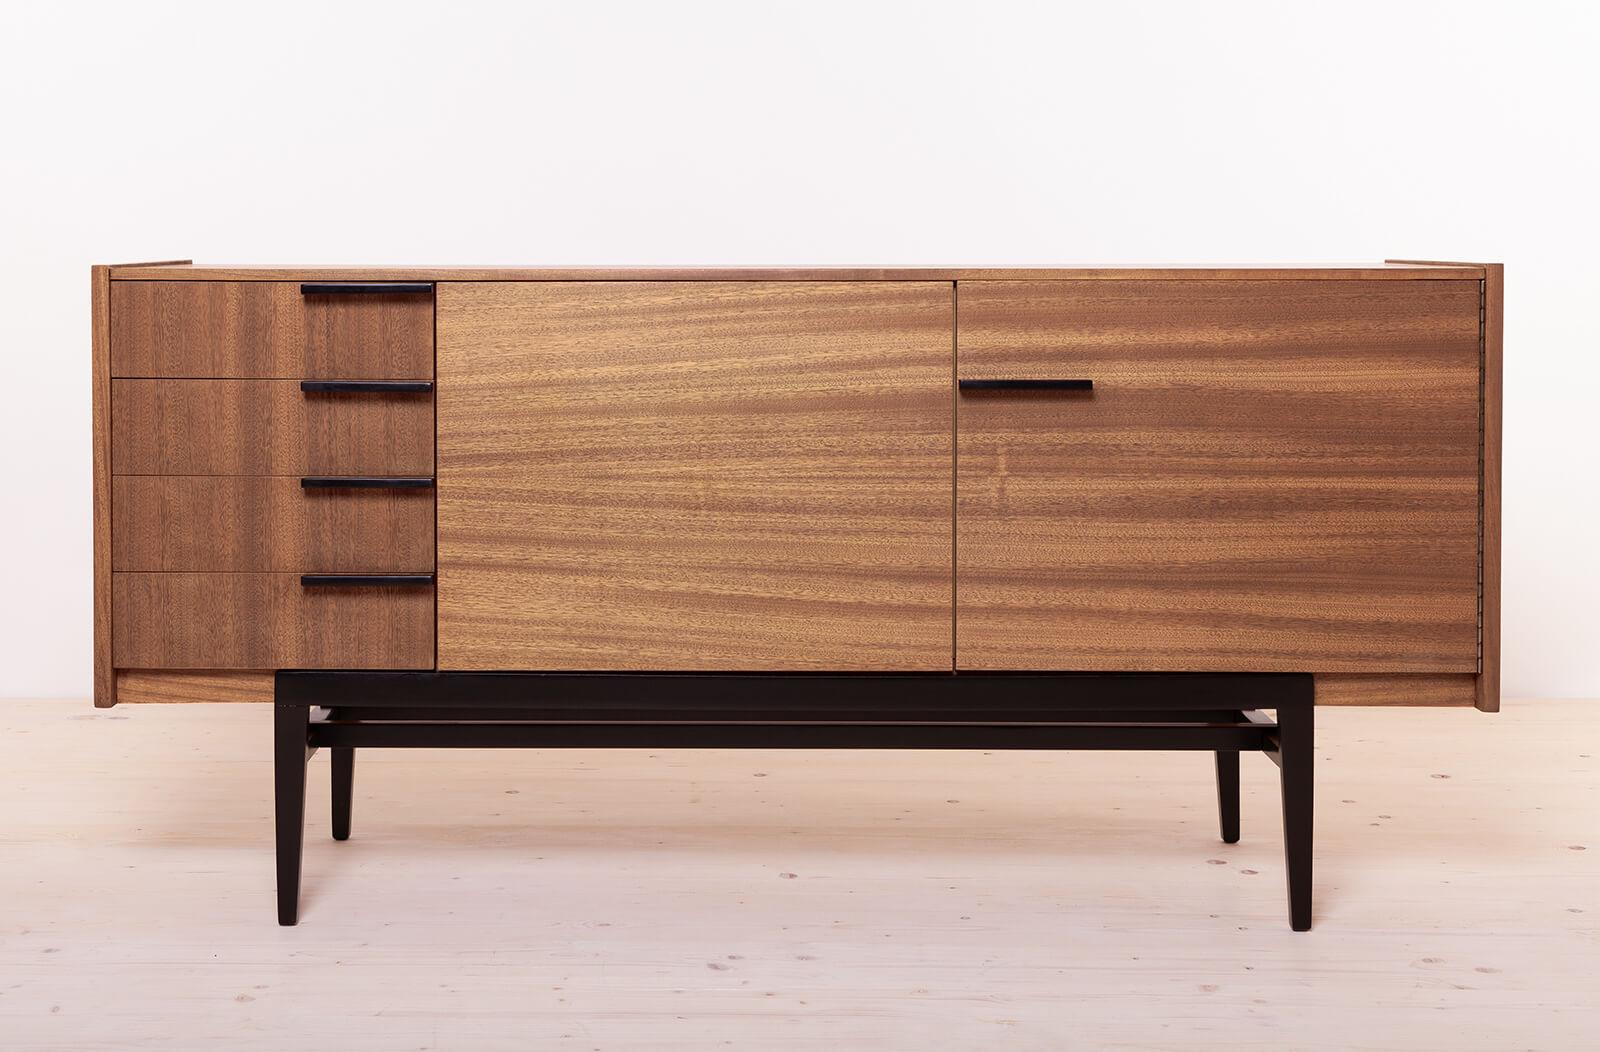 This exquisite sideboard, crafted in the 1960s in former Czechoslovakia, exemplifies the epitome of mid-century modern design. A testament to the renowned craftsmanship of UP ZAVODY and the creative vision of Frantisek Mezulanik, it embodies both